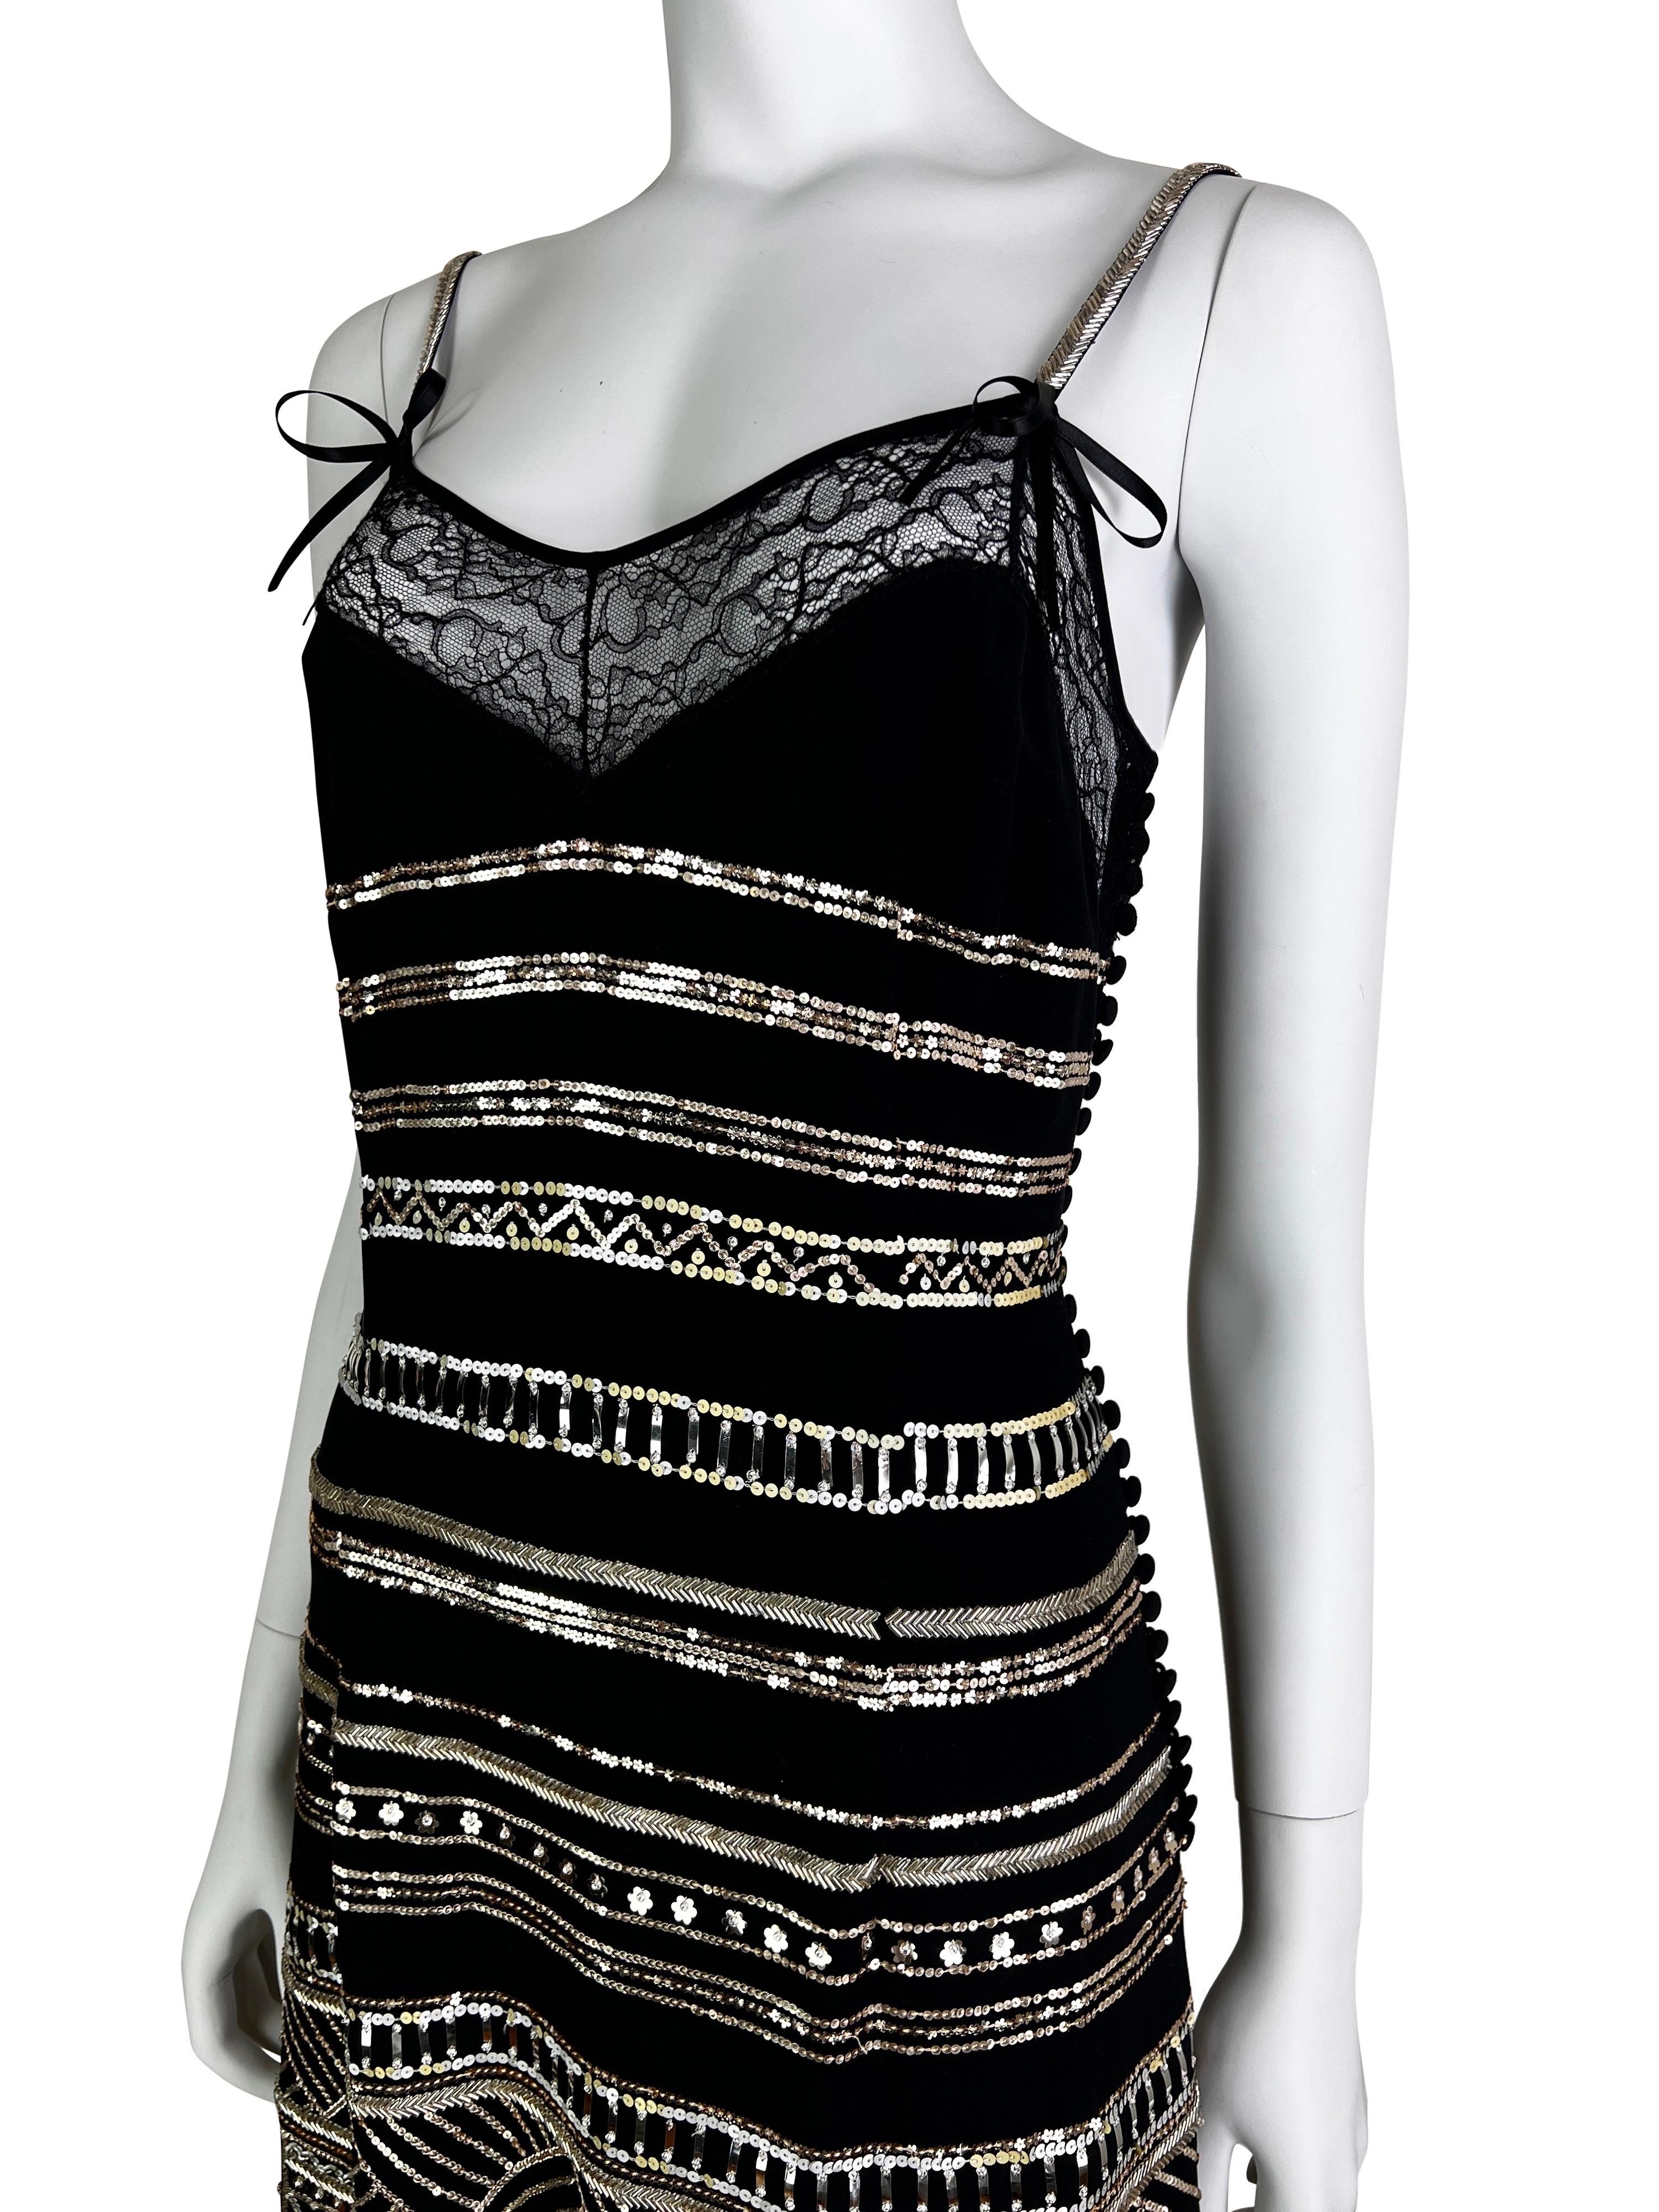 Dior by John Galliano Spring 2006 Embellished and Beaded Silk Cami Dress  For Sale 2